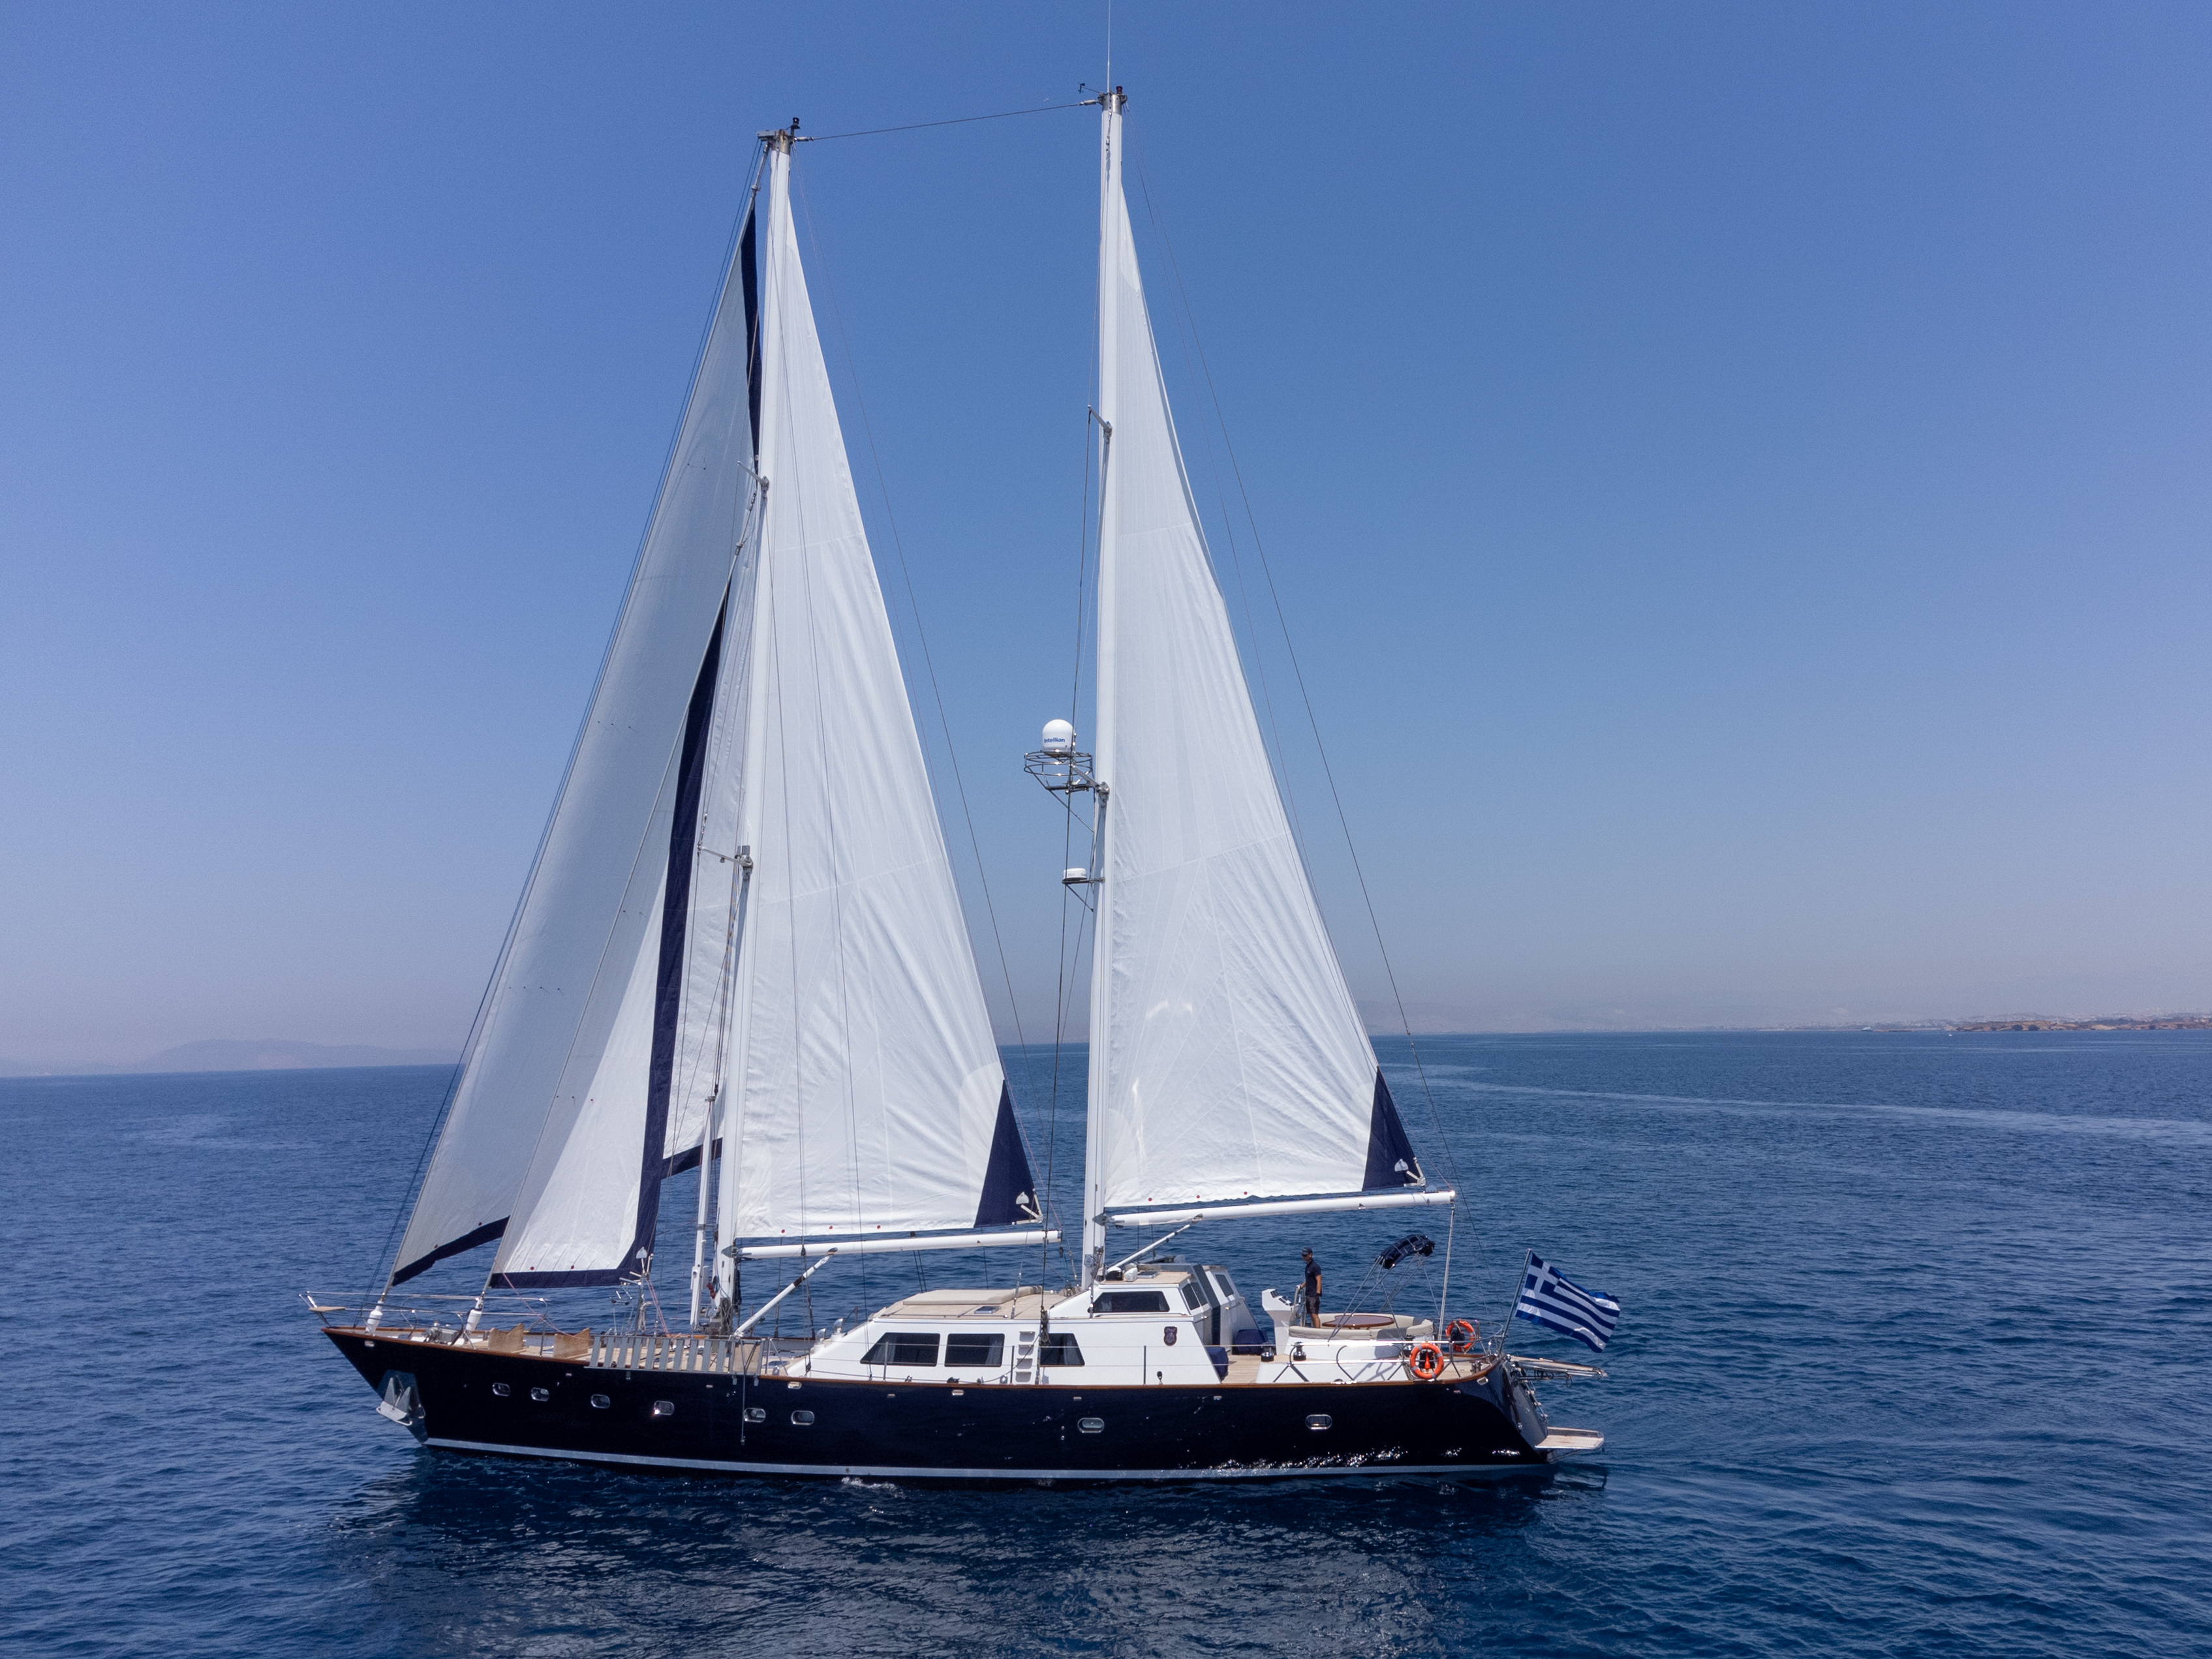 CCYD 85 - Superyacht charter Saint Lucia & Boat hire in Greece Athens and Saronic Gulf Athens Piraeus Marina Zea 5